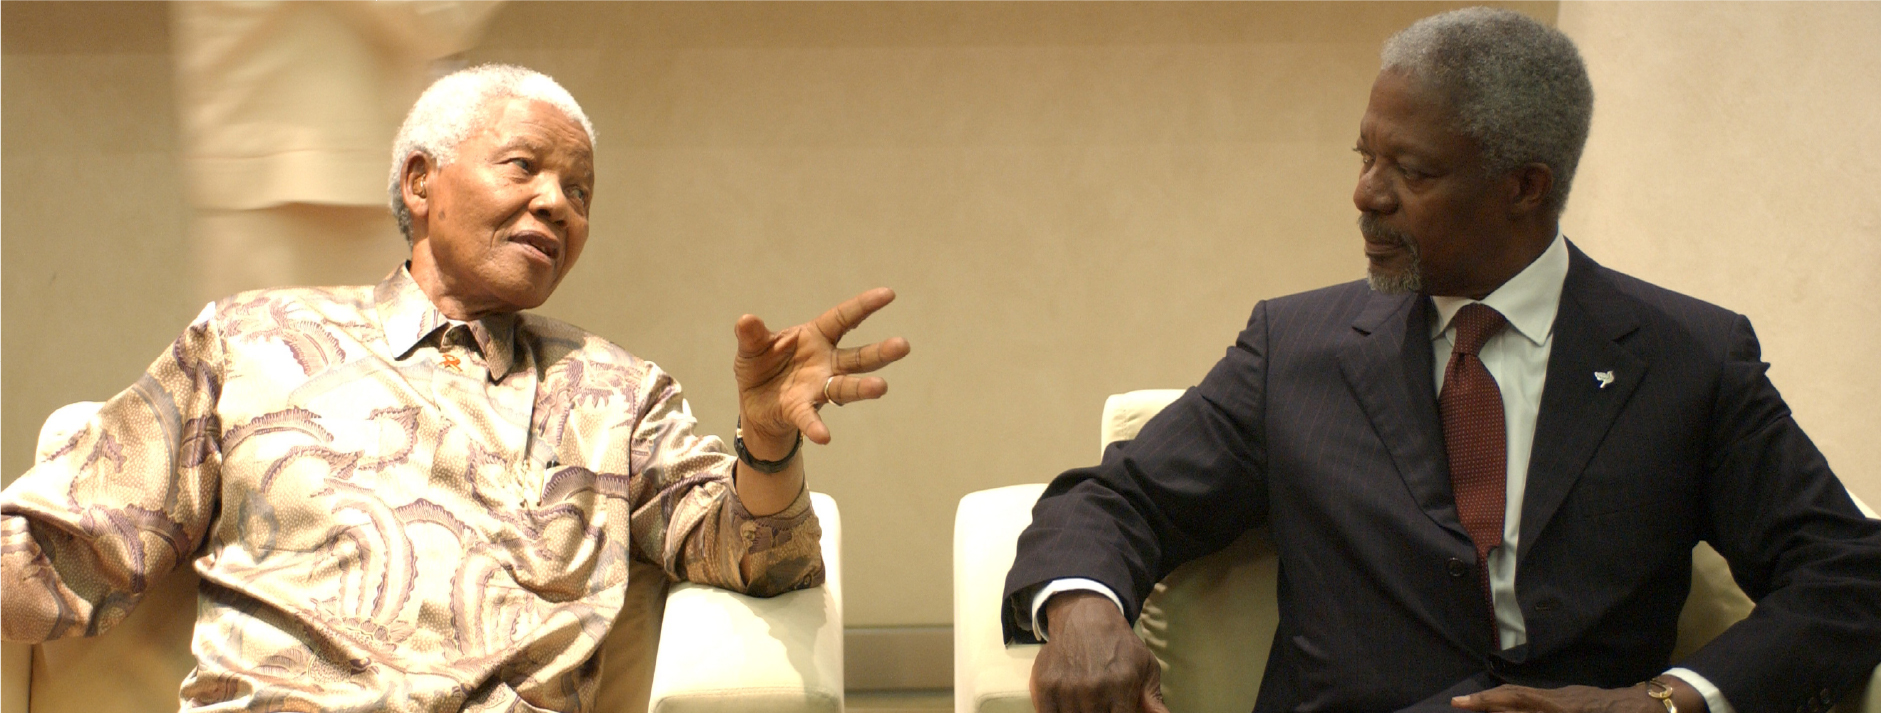 UN Secretary-General Kofi Annan (at right) in a discussion with Nelson Mandela during the World Summit.